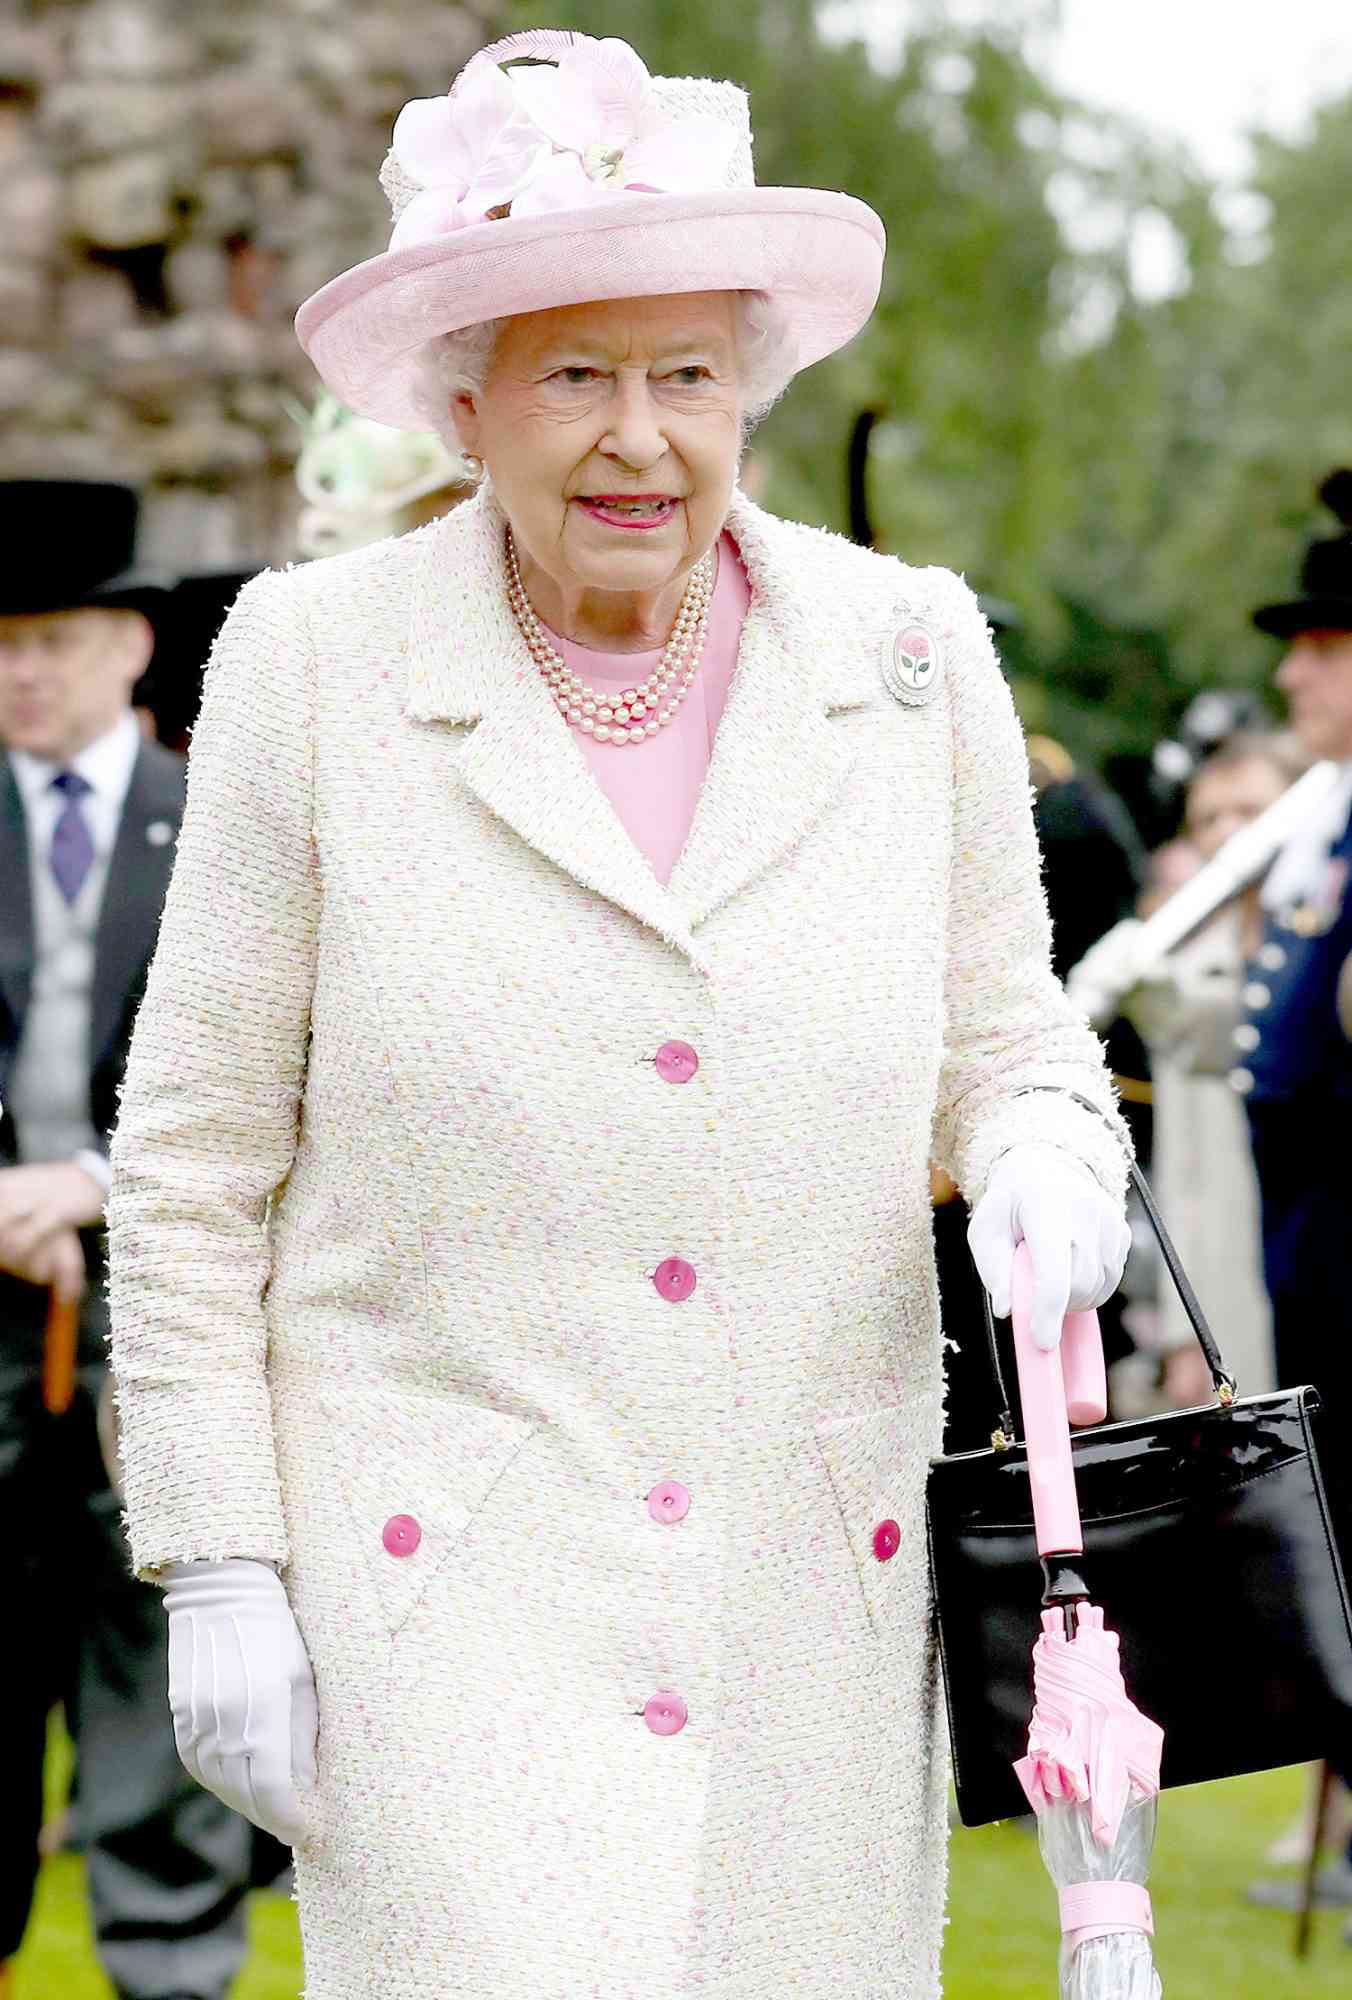 Queen Elizabeth II Hosts Garden Party At The Palace Of Holyroodhouse